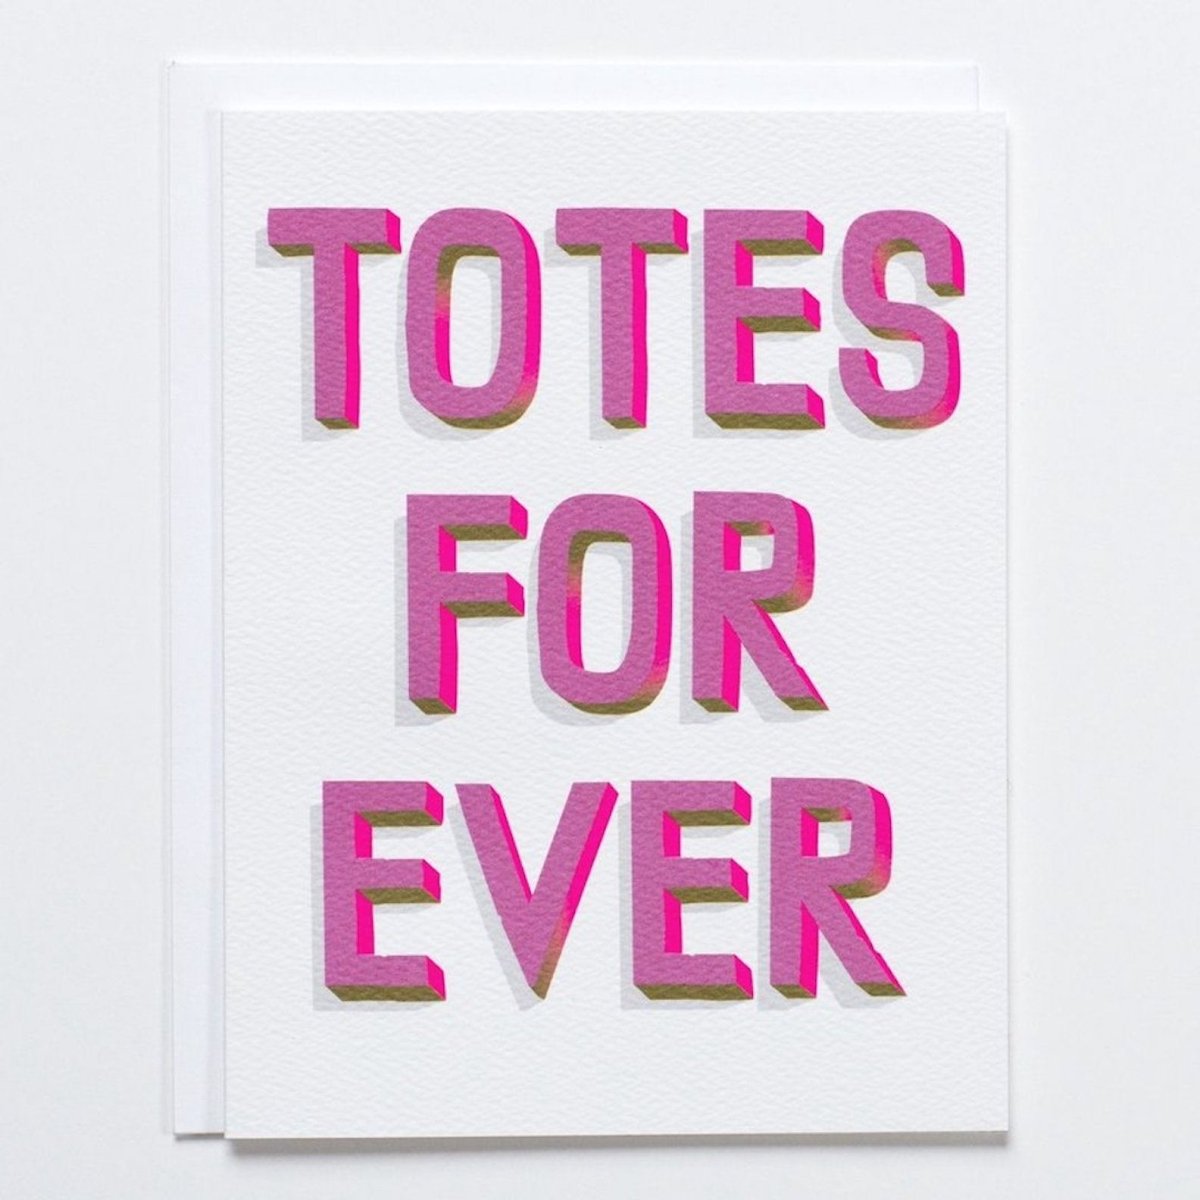 White card with large pink text the reads: "TOTES FOR EVER." Comes with a white envelope. Made with recycled paper by Banquet Atelier in Vancouver, British Columbia, Canada.